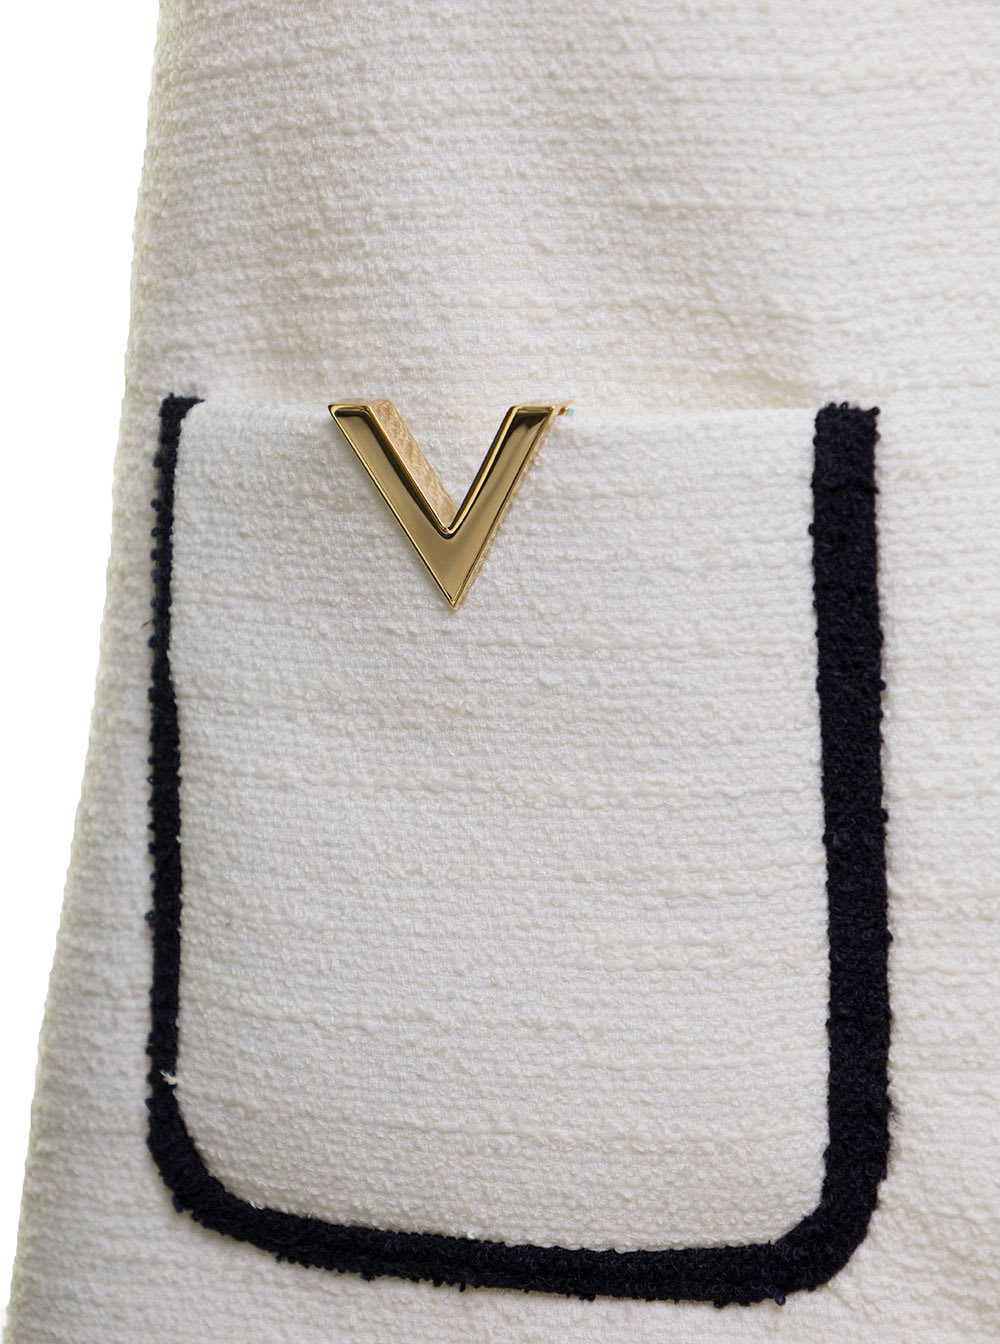 VALENTINO BLACK AND WHITE TWEED DRESS WITH VLOGO DETAILS VALENITNO WOMAN 